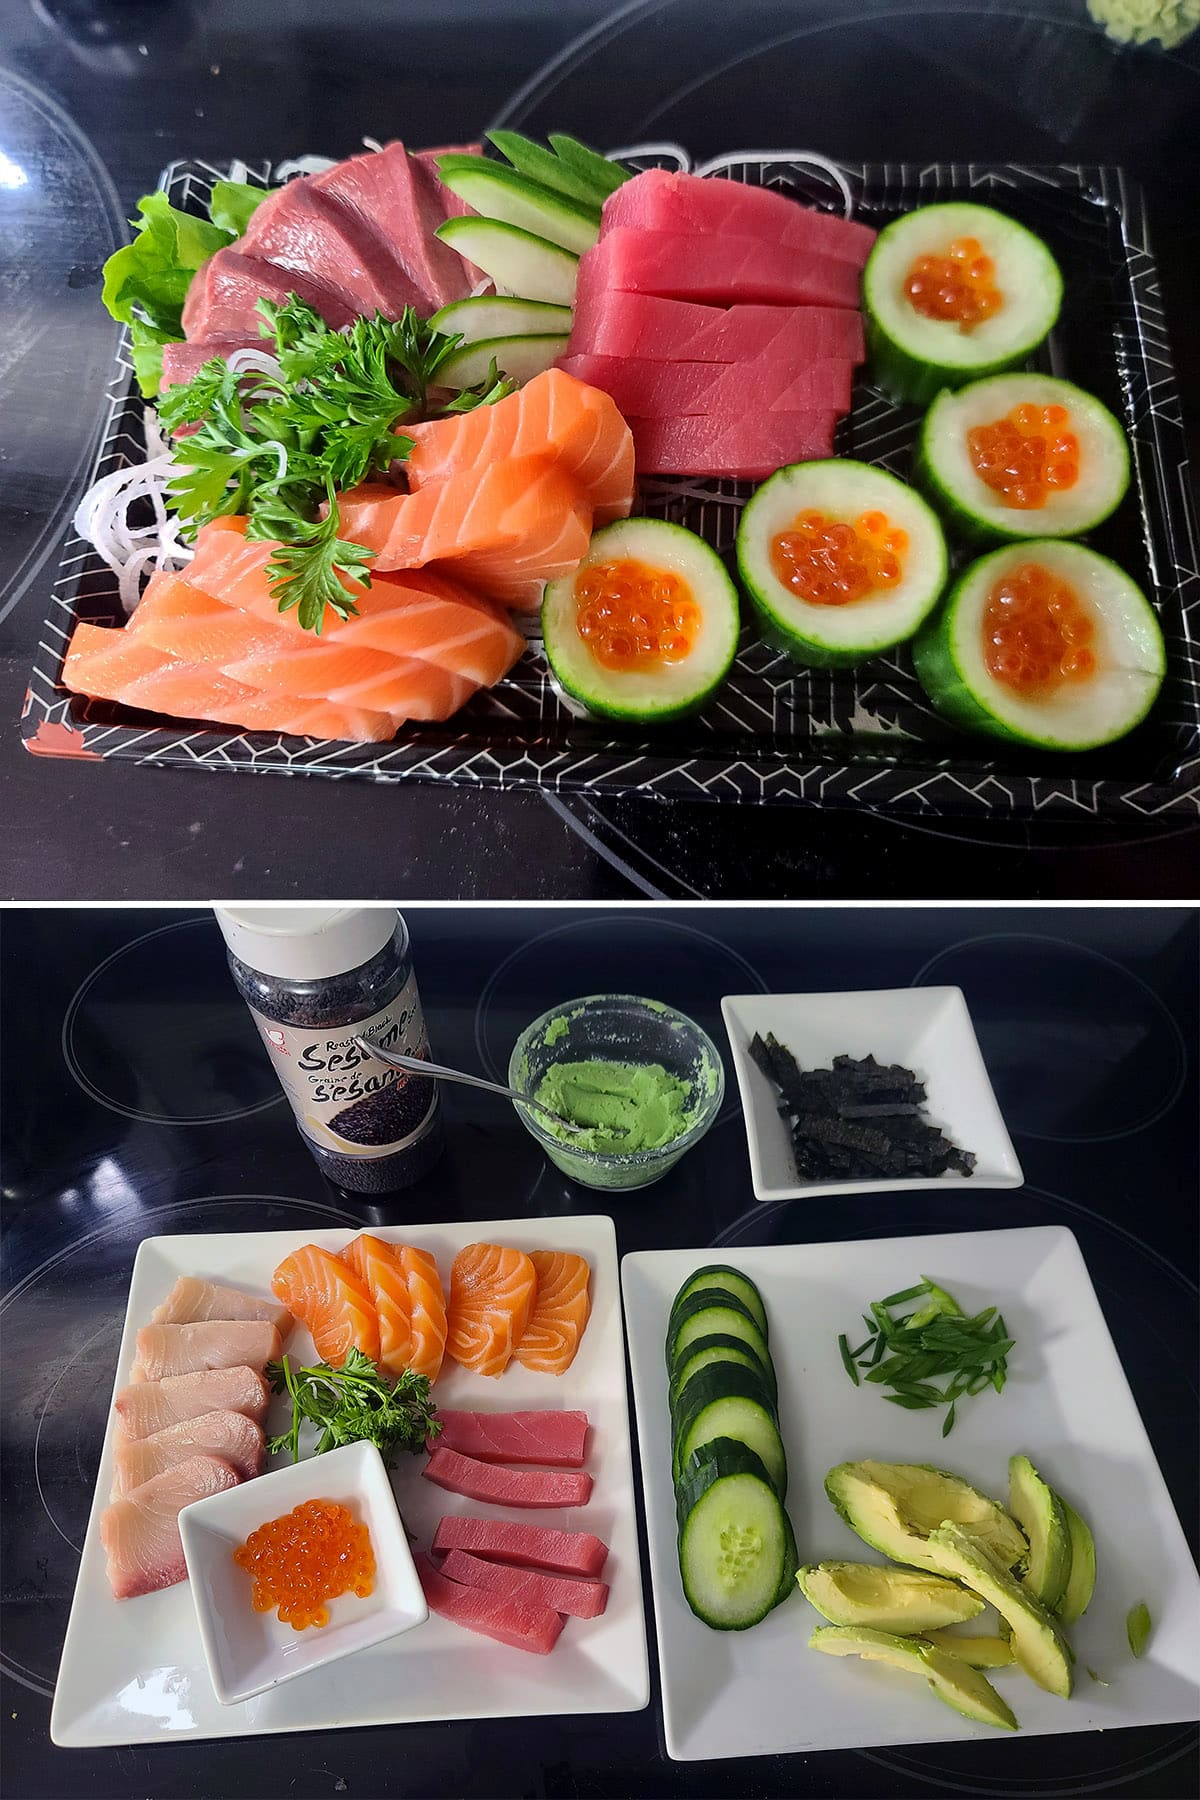 A two part image showing a takeout container of sashimi, and that sashimi arranged on plates with other ingredients.